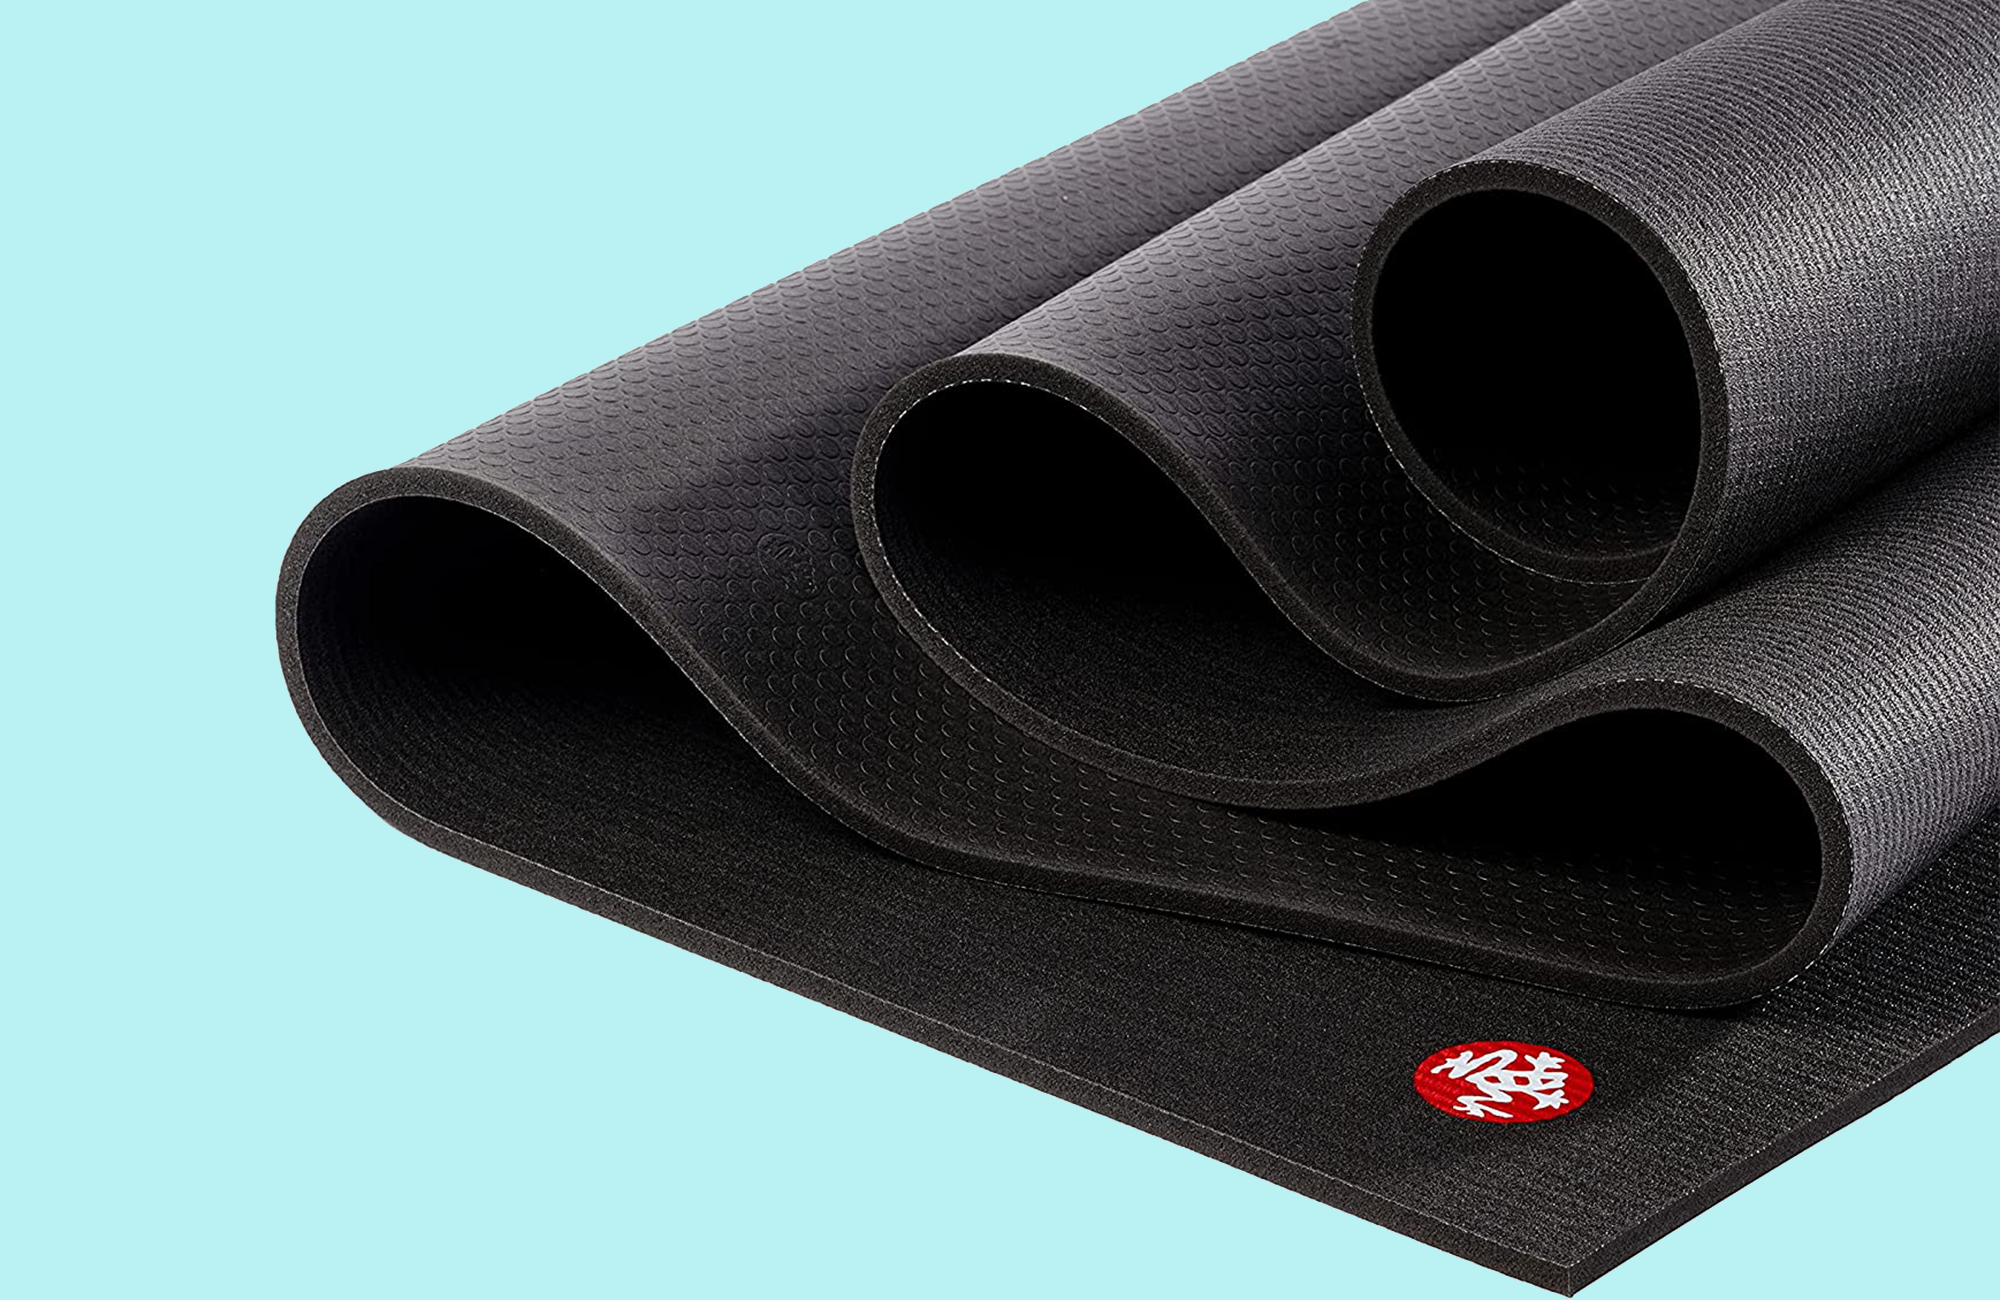  Double-Sided Upright Yoga Mat Holder Stand